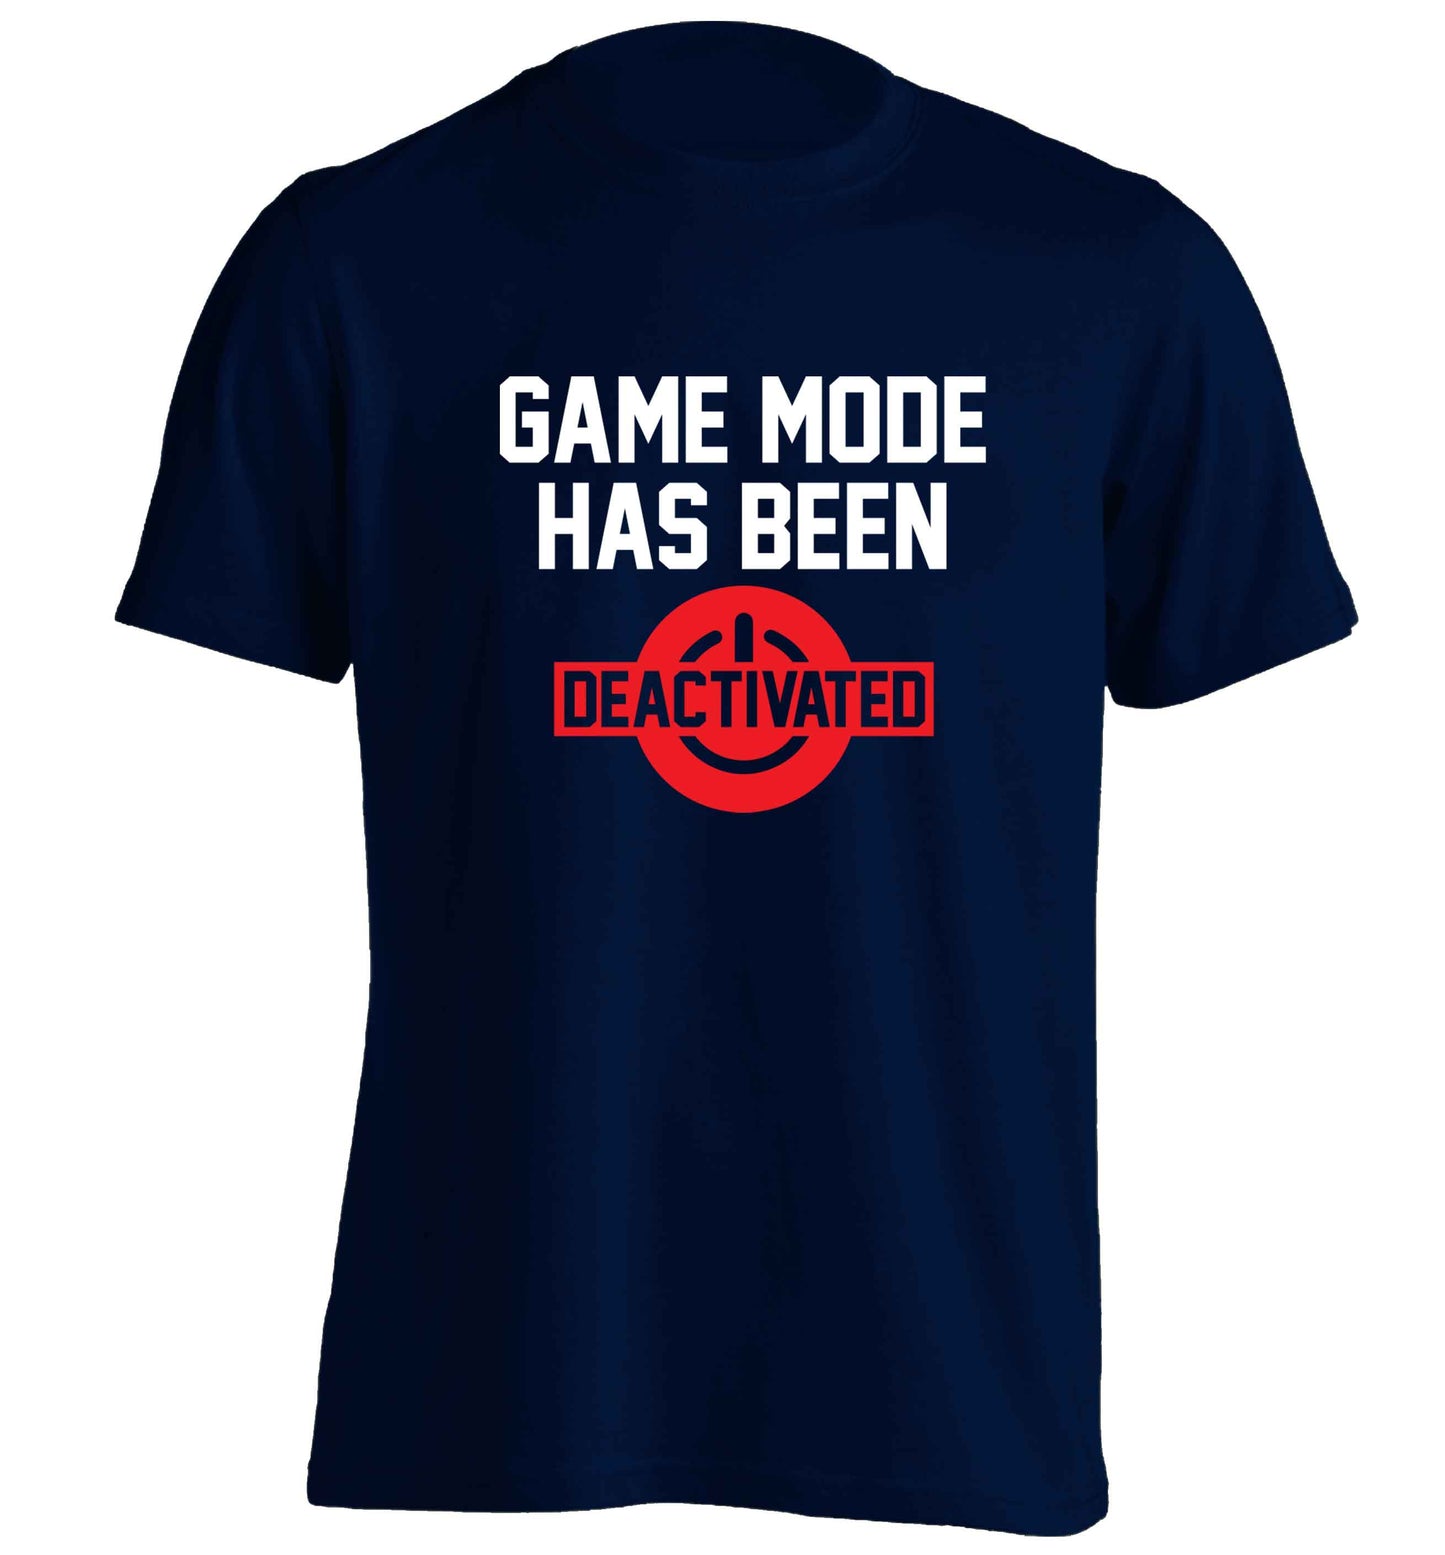 Game Mode Has Been Deactivated adults unisex navy Tshirt 2XL